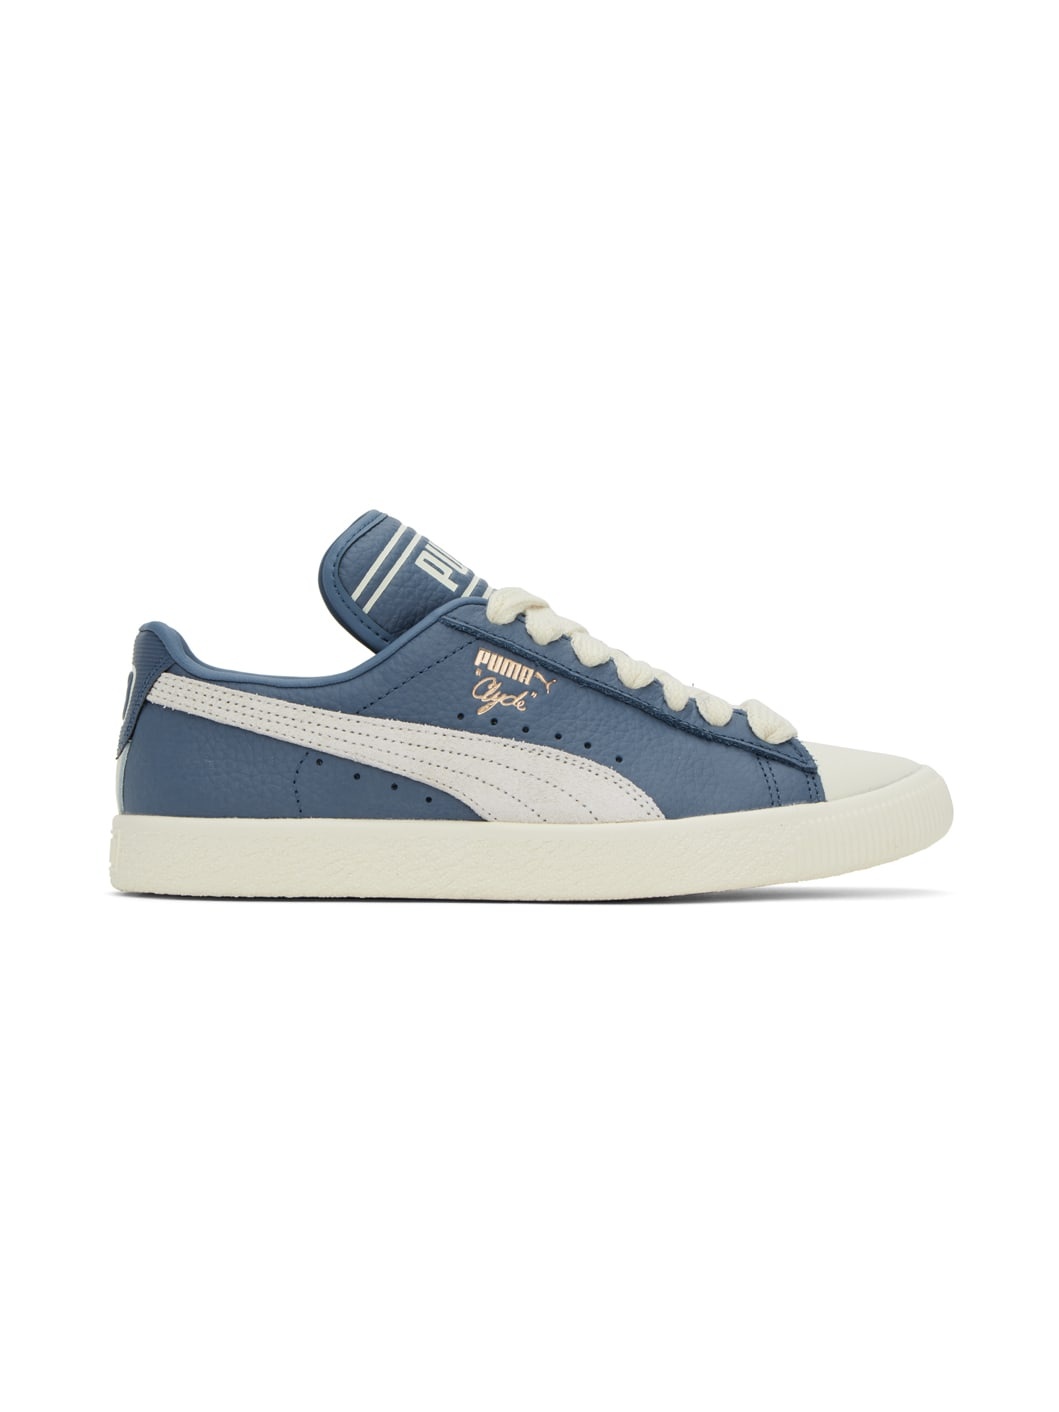 Blue Puma Edition Clyde Q-3 Sneakers - 1